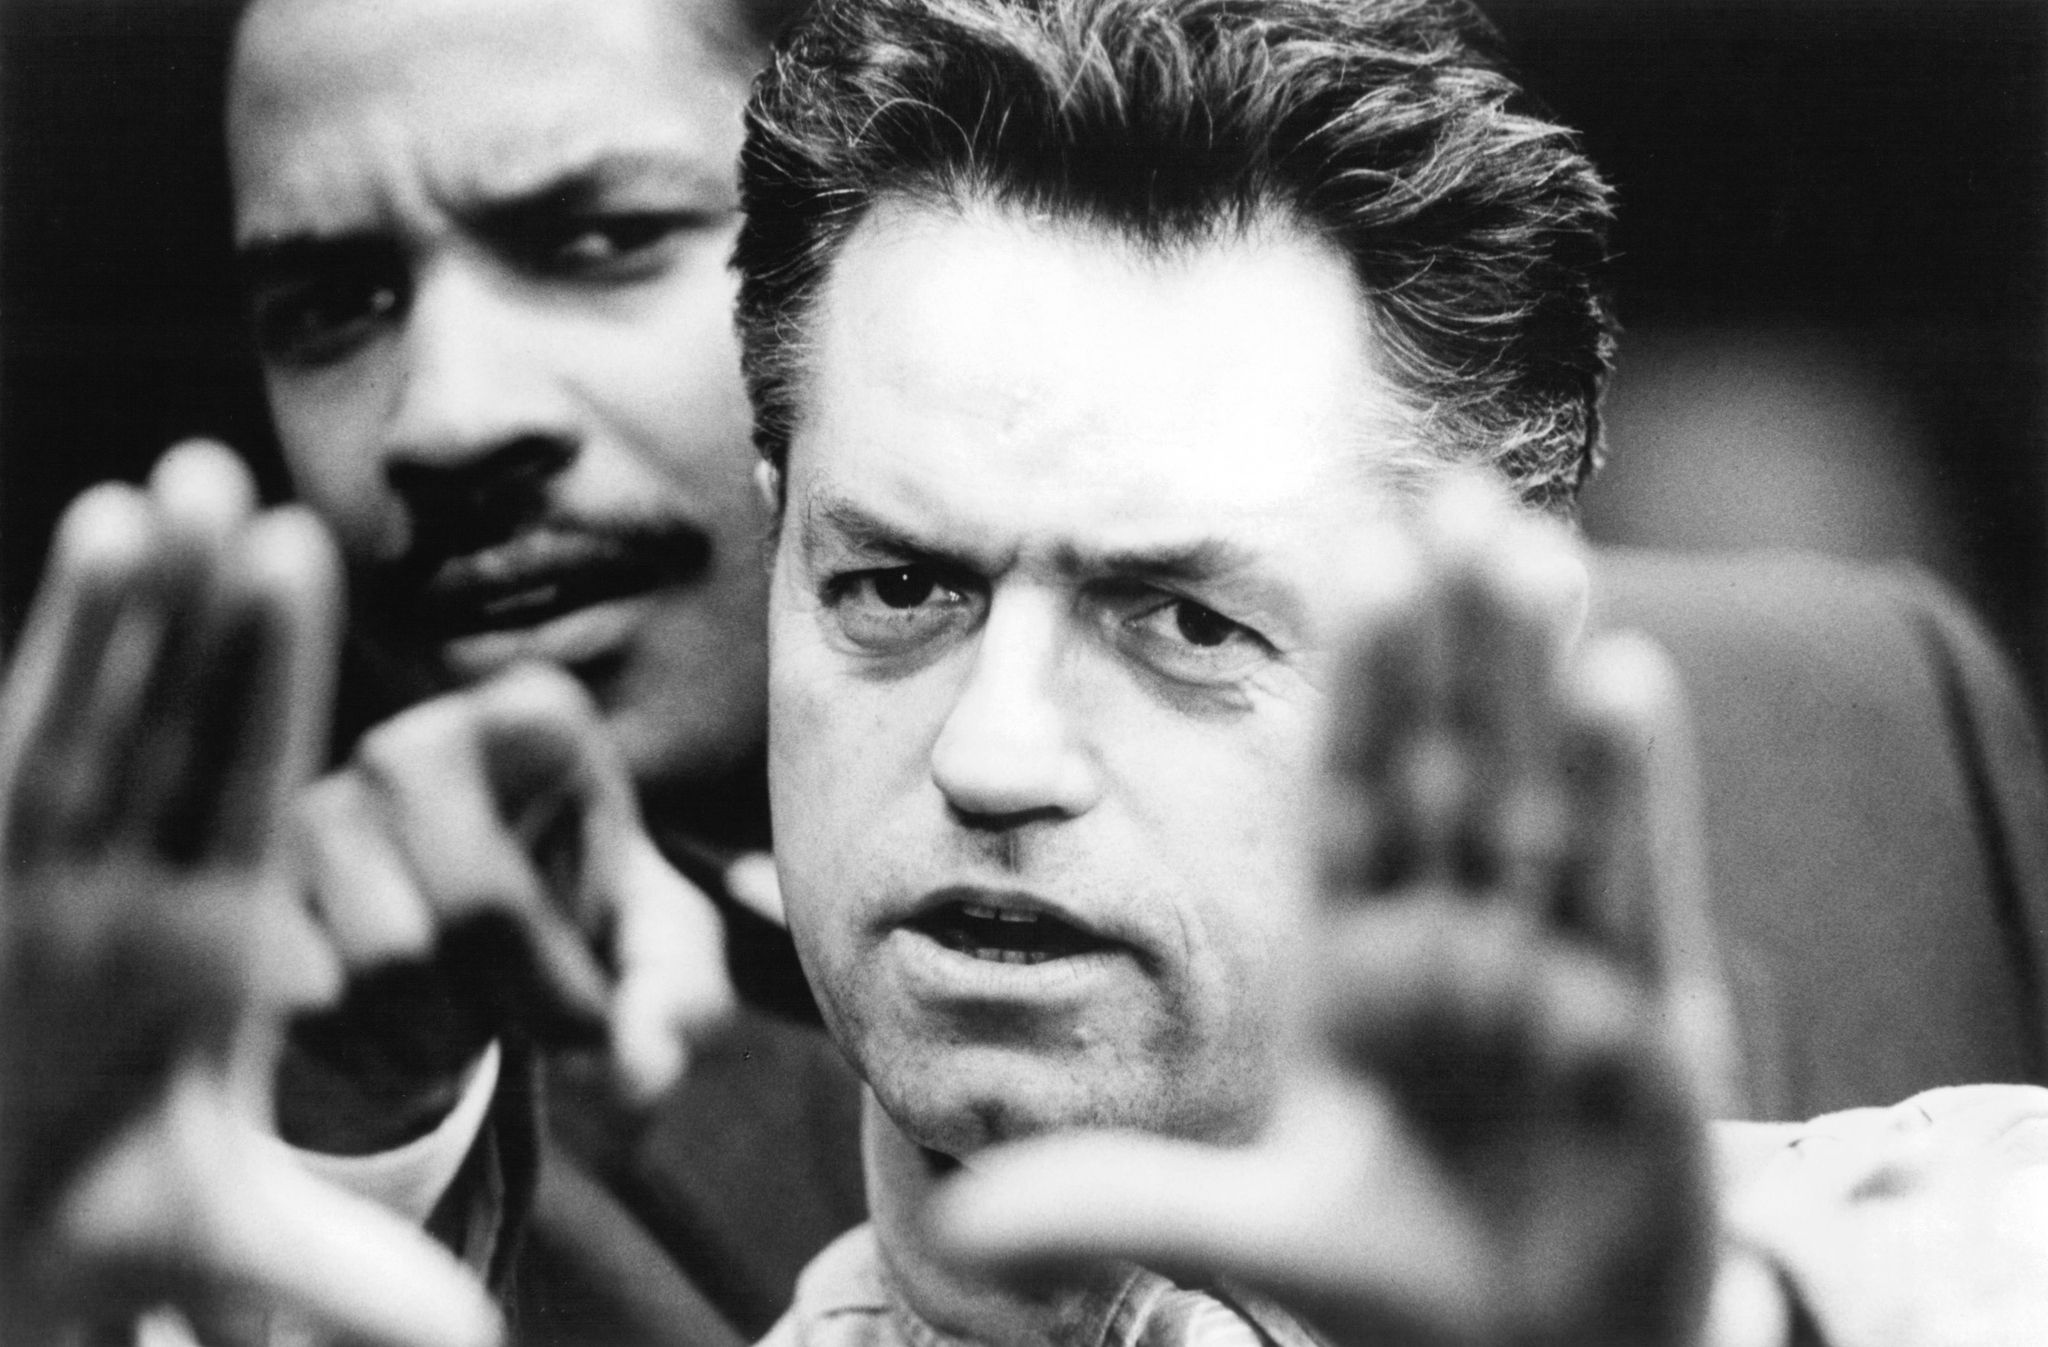 The Silence of the Lambs director Jonathan Demme.